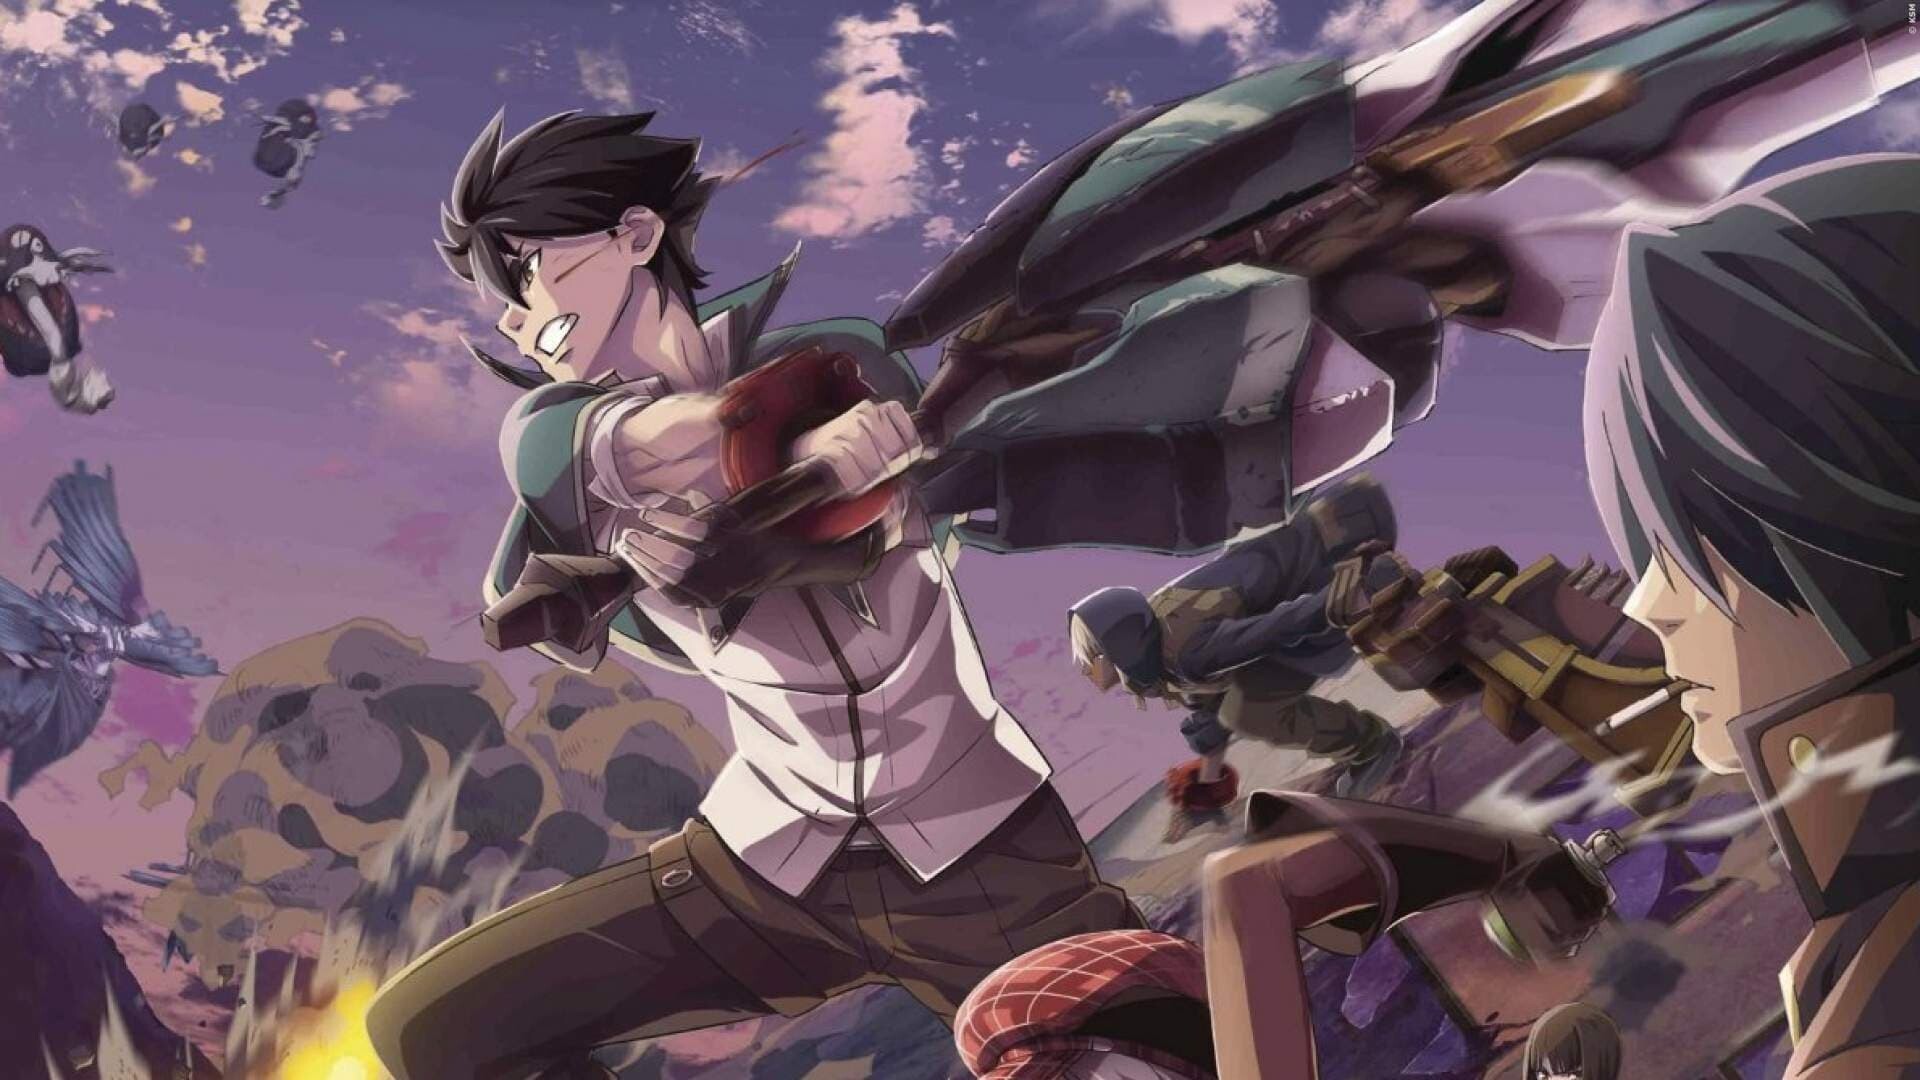 God Eater (TV series): An anime written and directed by Takayuki Hirao and produced by Hikaru Kondo. 1920x1080 Full HD Wallpaper.